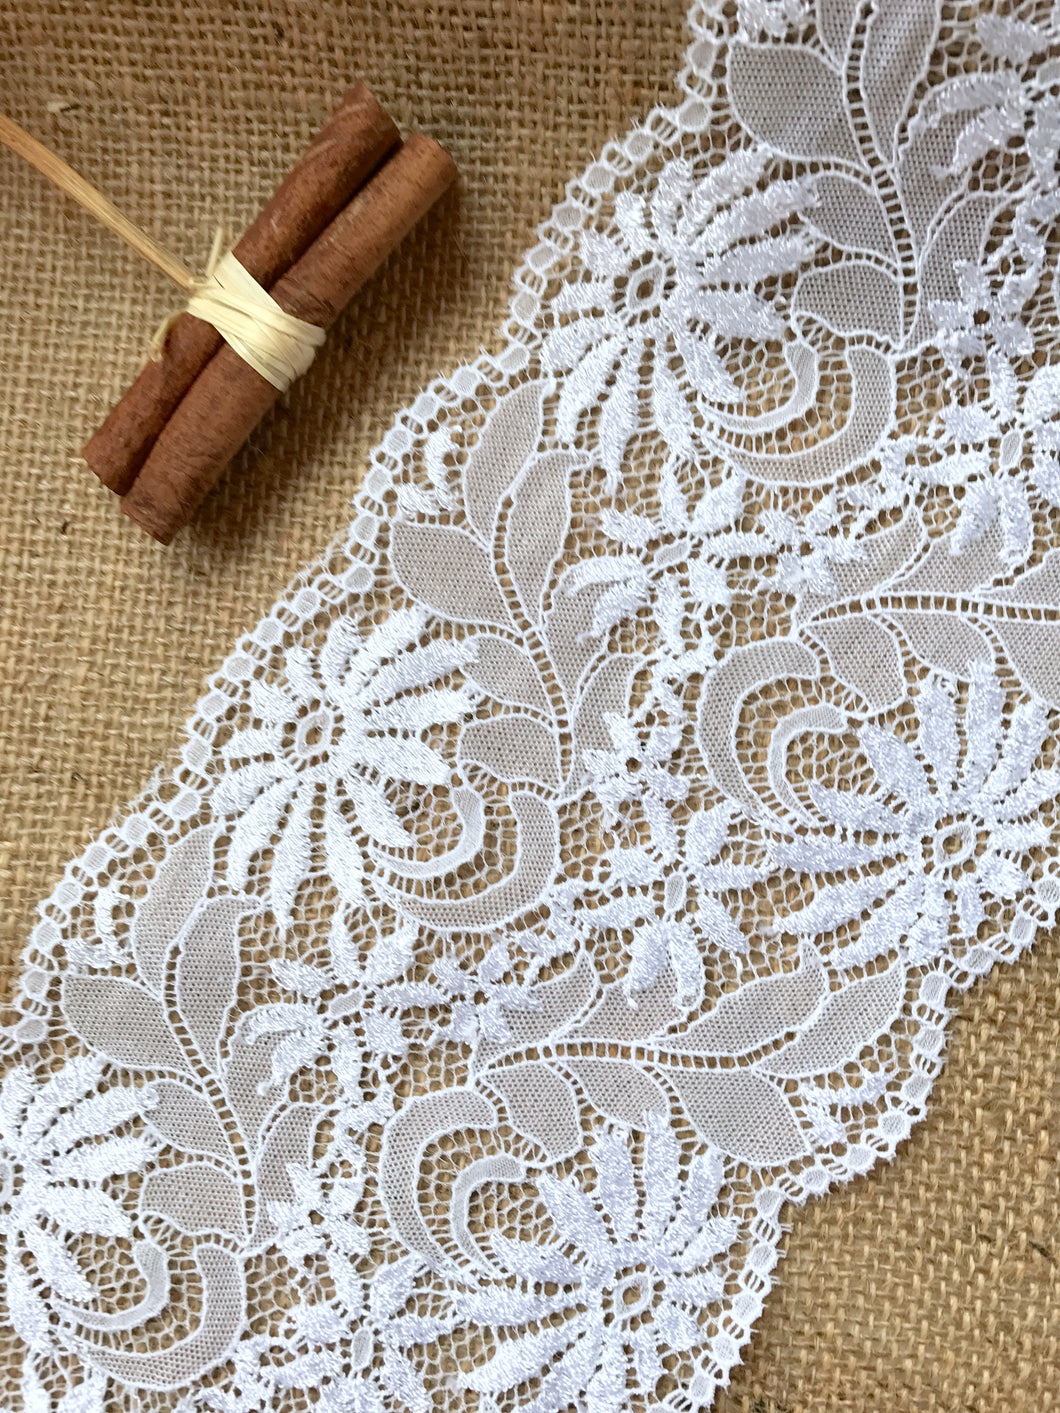 Stunning White Stretch French Leavers Lace 15 cm/6